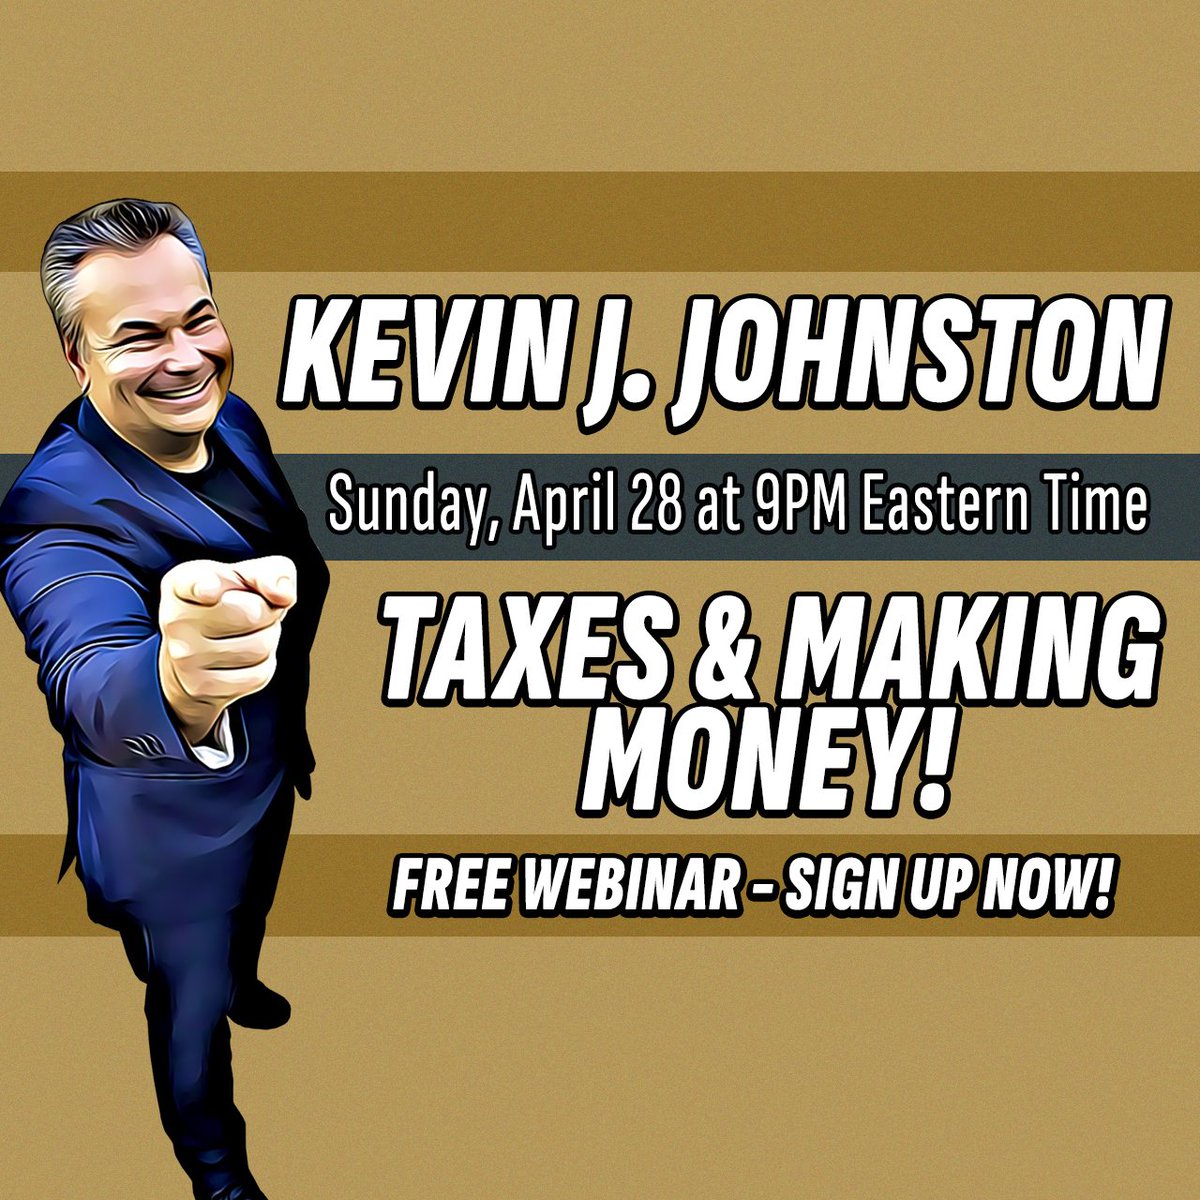 LEARN HOW TO BEAT TAXES. LEARN HOW TO MAKE MONEY OFF OF TAXES. The FREE Webinar with Kevin J. Johnston Learn what you need to know about commerce and taxes in Canada and the United States. Sunday, April 28 - 9PM Eastern Time streamyard.com/watch/yARKCQig…